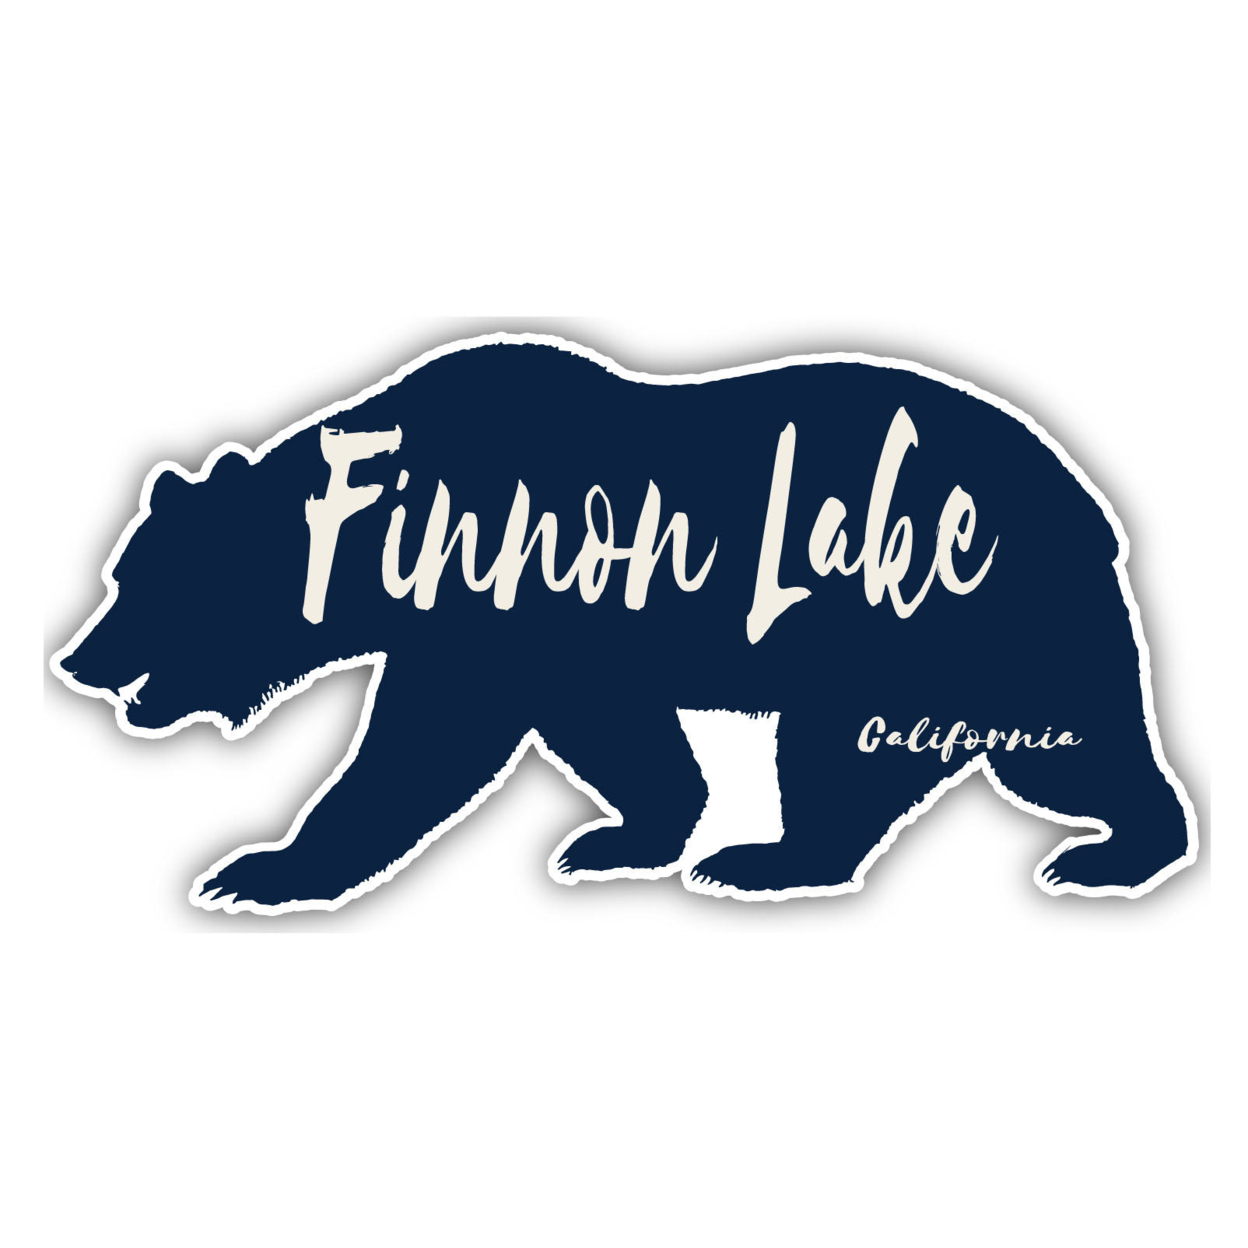 Finnon Lake California Souvenir Decorative Stickers (Choose Theme And Size) - 4-Pack, 10-Inch, Camp Life